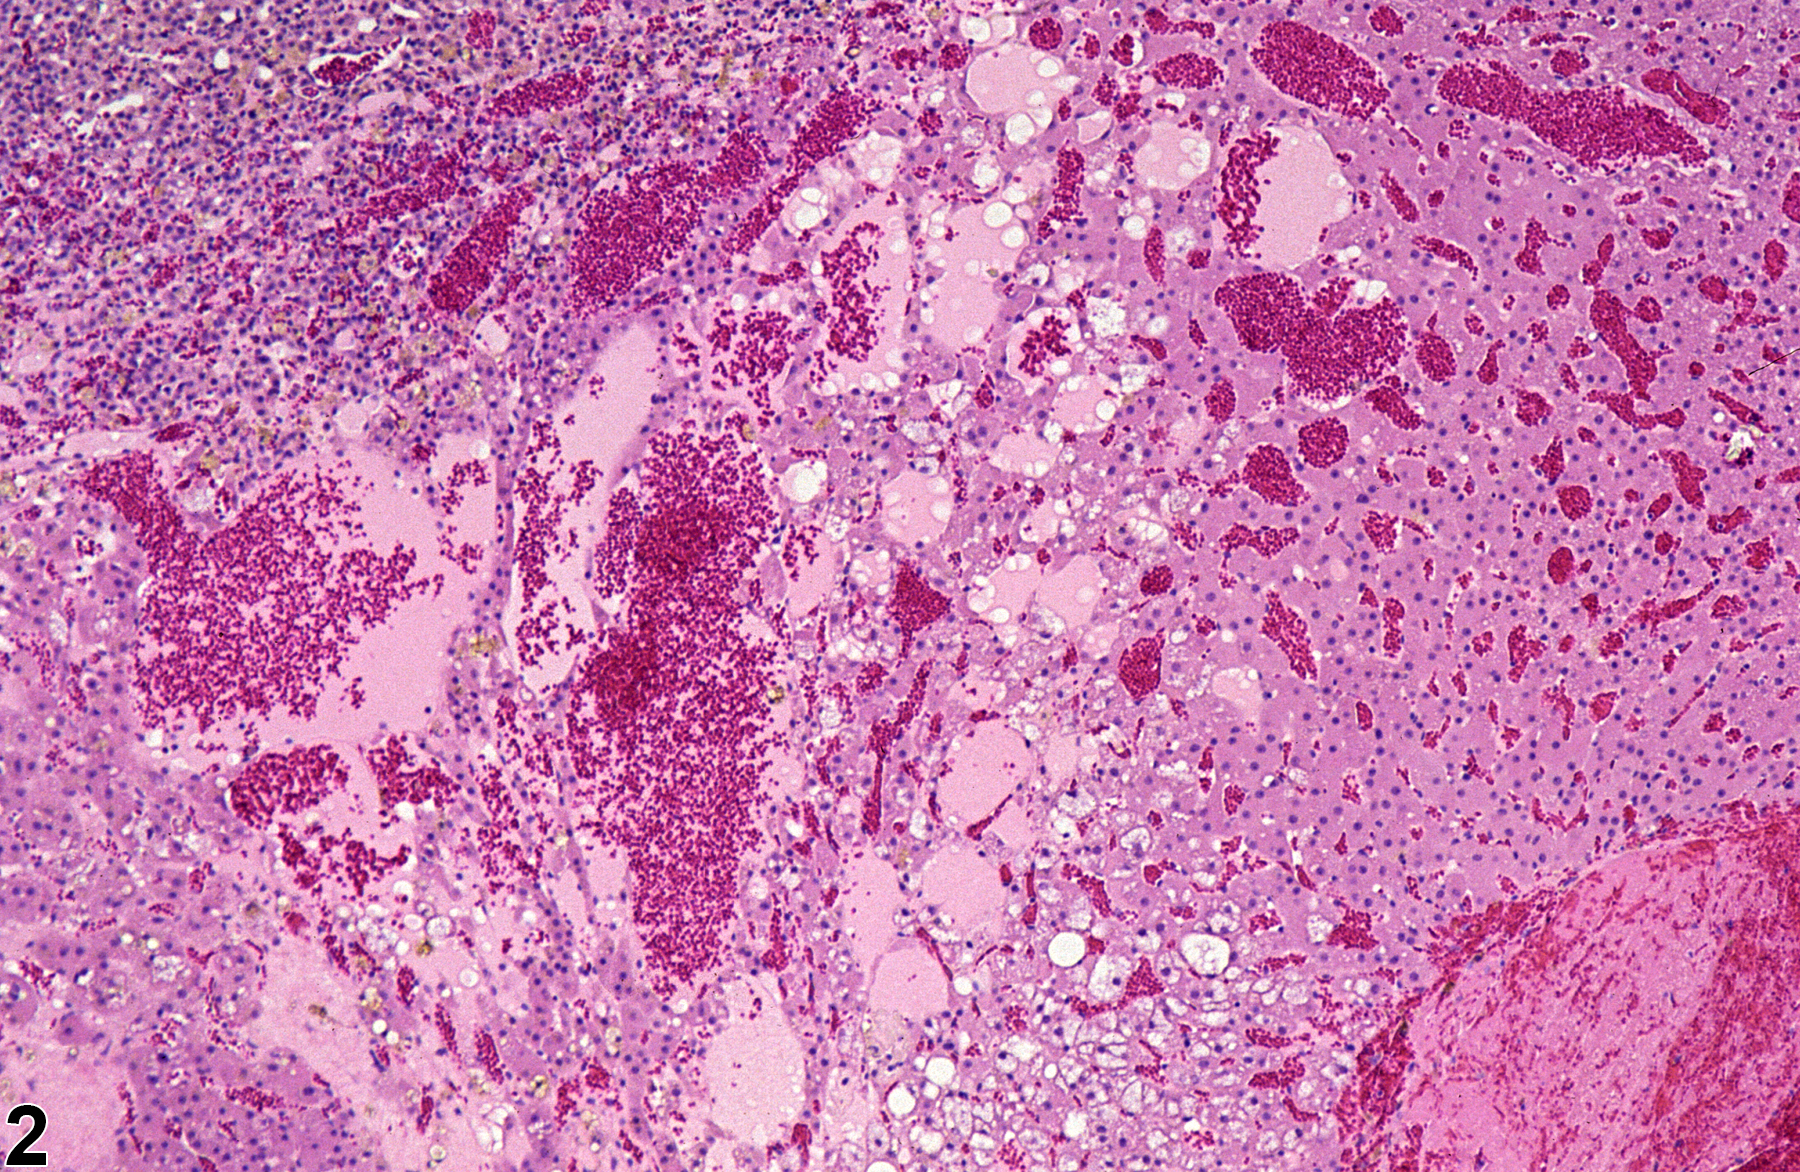 Image of degeneration, cystic in the adrenal gland cortex from a female Sprague-Dawley rat in a chronic study